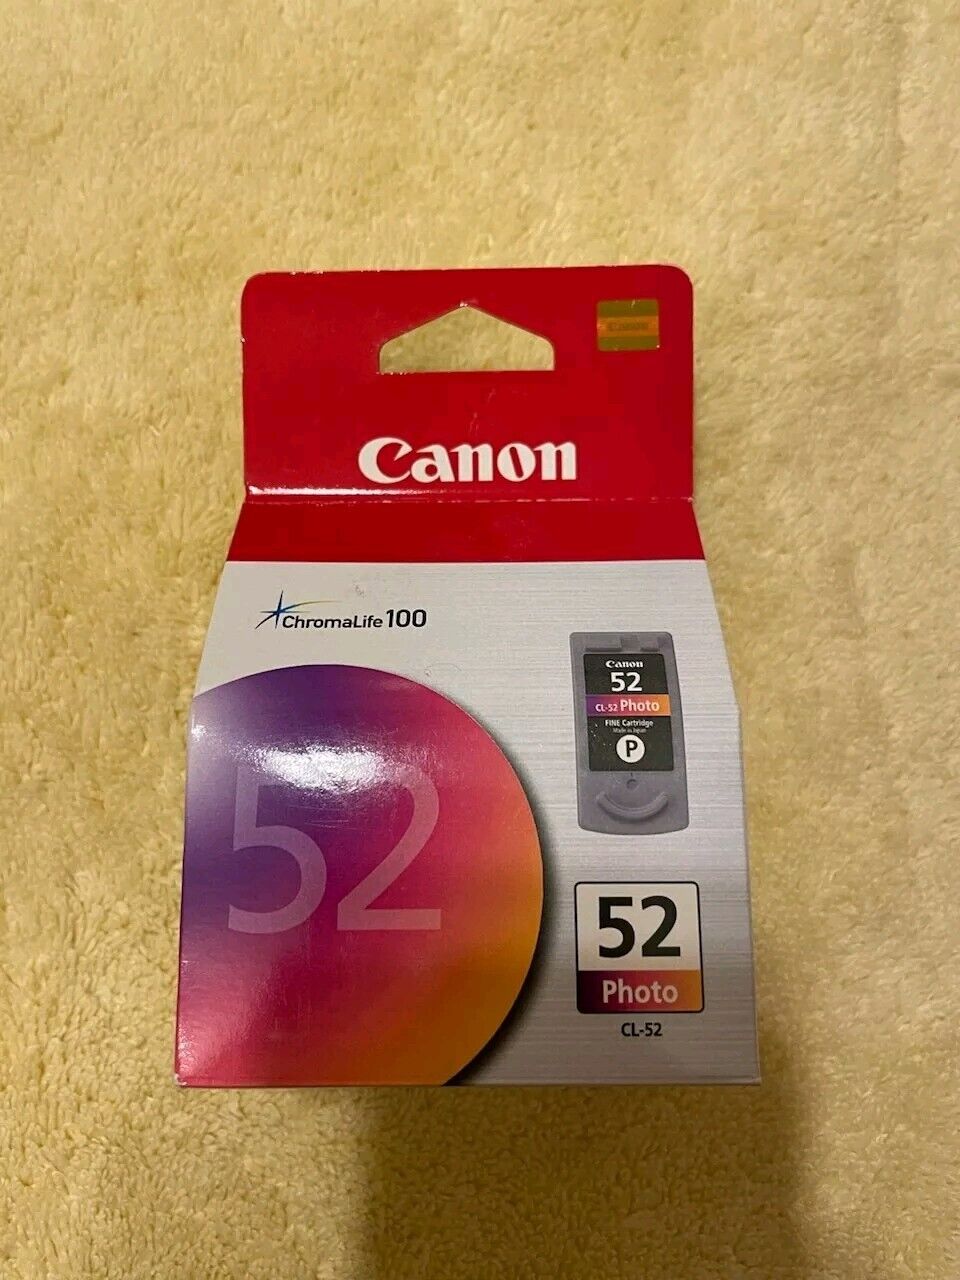 Canon Chromalife 100 CL-52 Photo Ink Cartridge Tri-Color For PIXMA Series